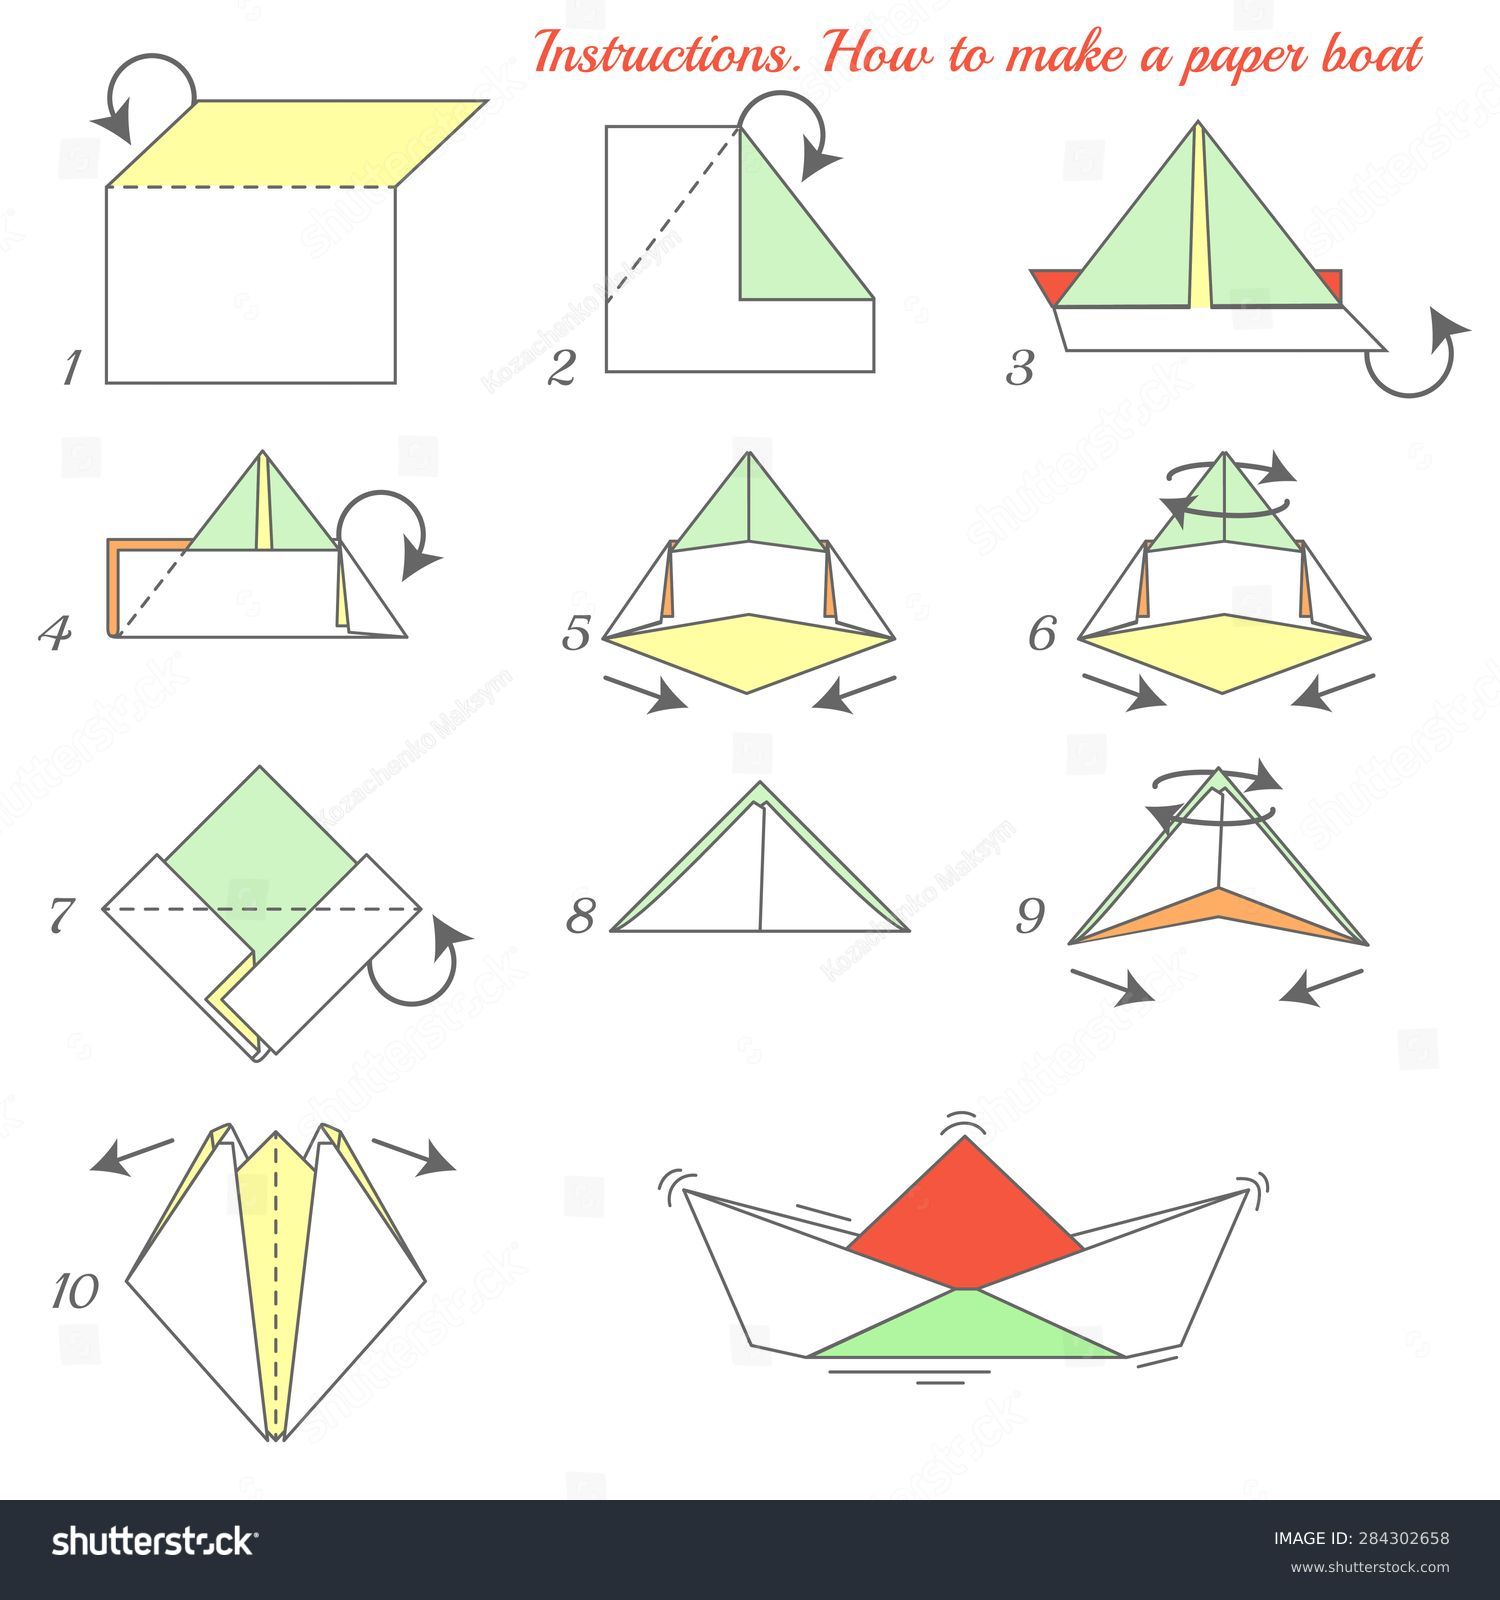 How to make a paper Boat